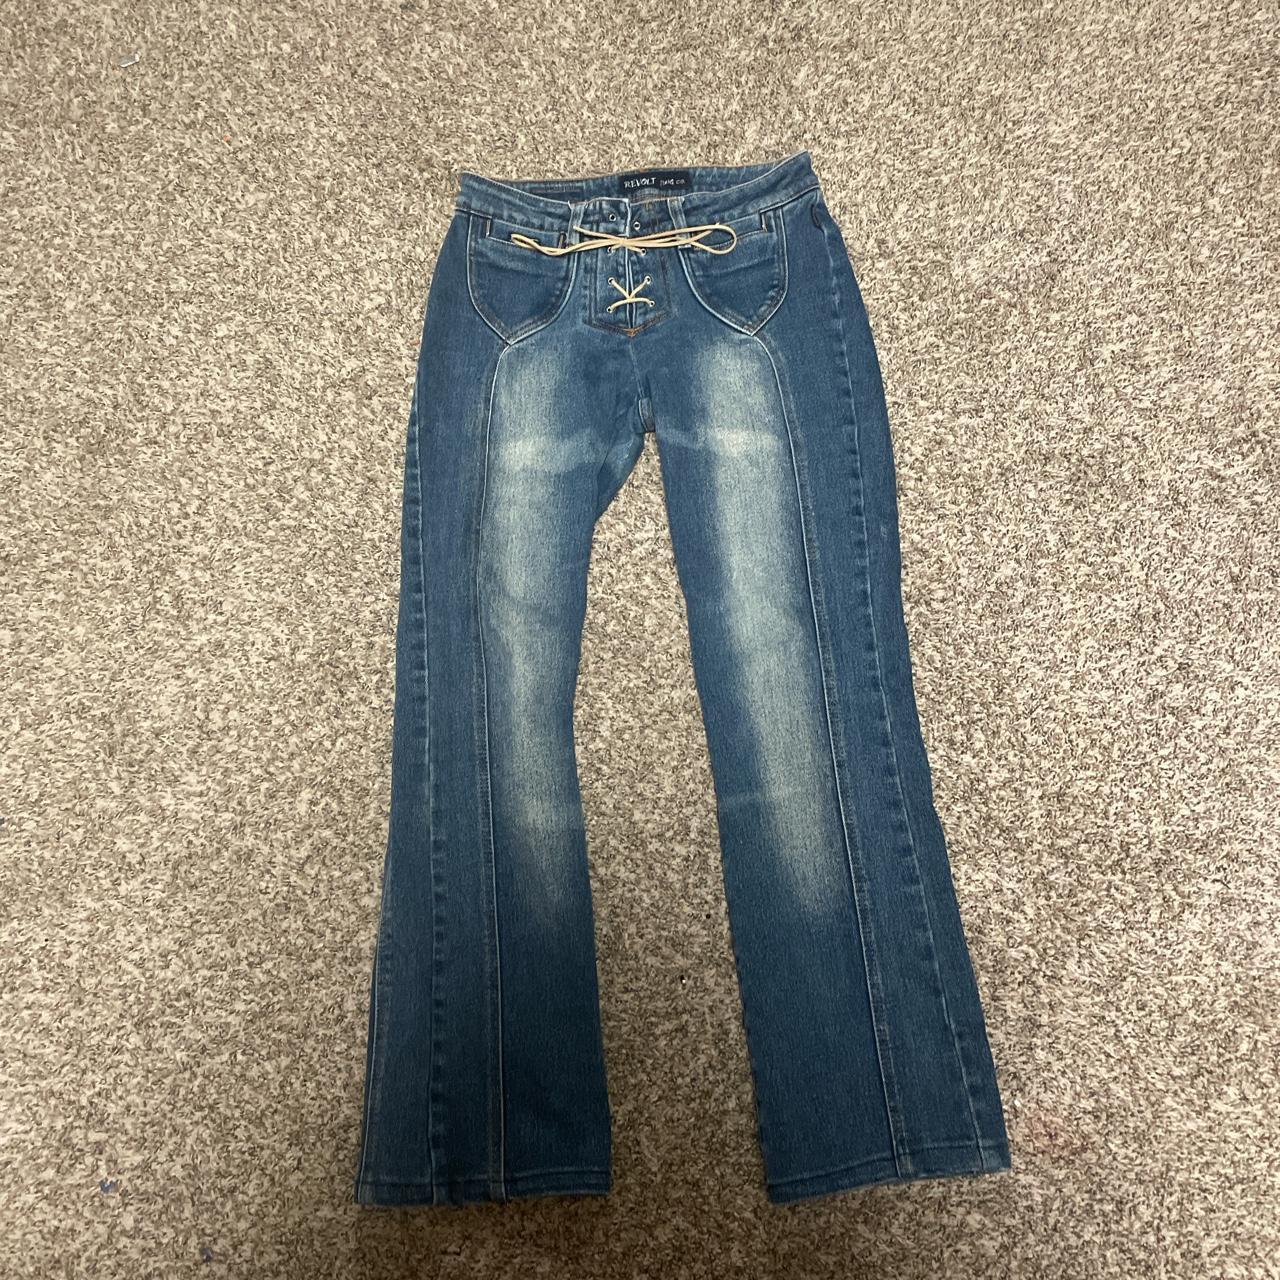 revolt lace up jeans. size 7 i got these from... - Depop